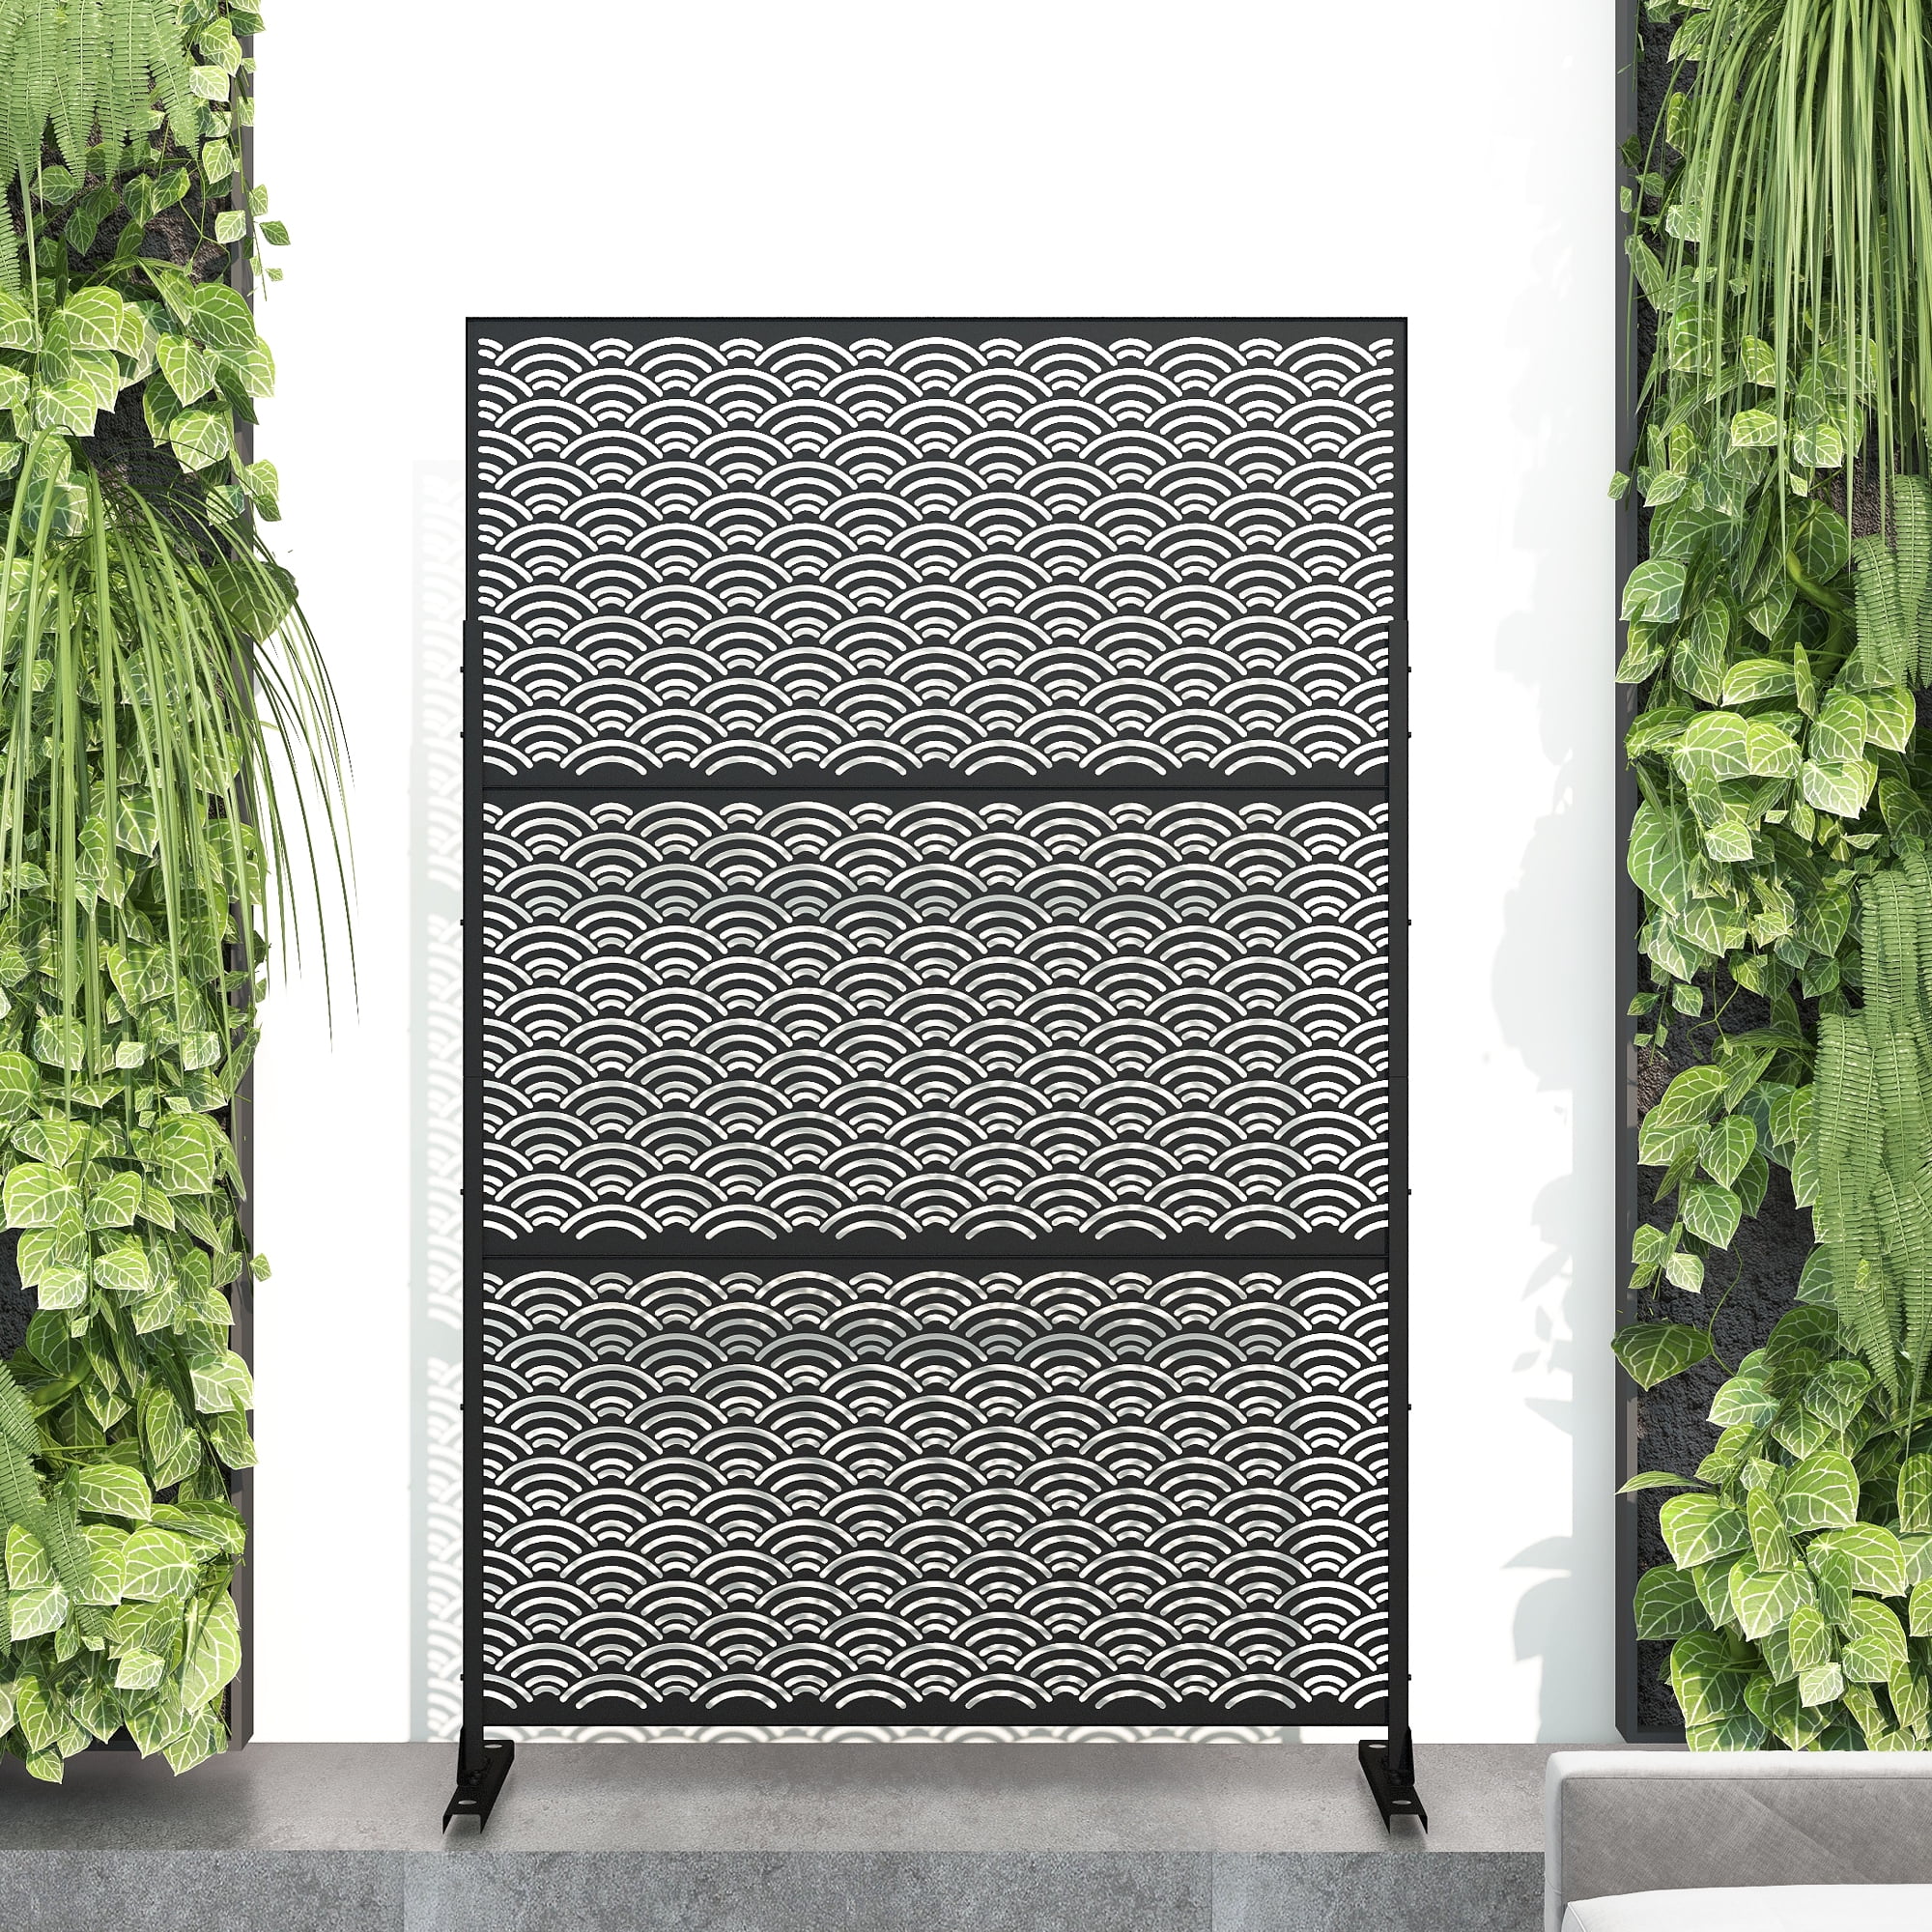 FUFU&GAGA 6.3 ft. H x 4 ft. W Outdoor Privacy Screen Wall in Black